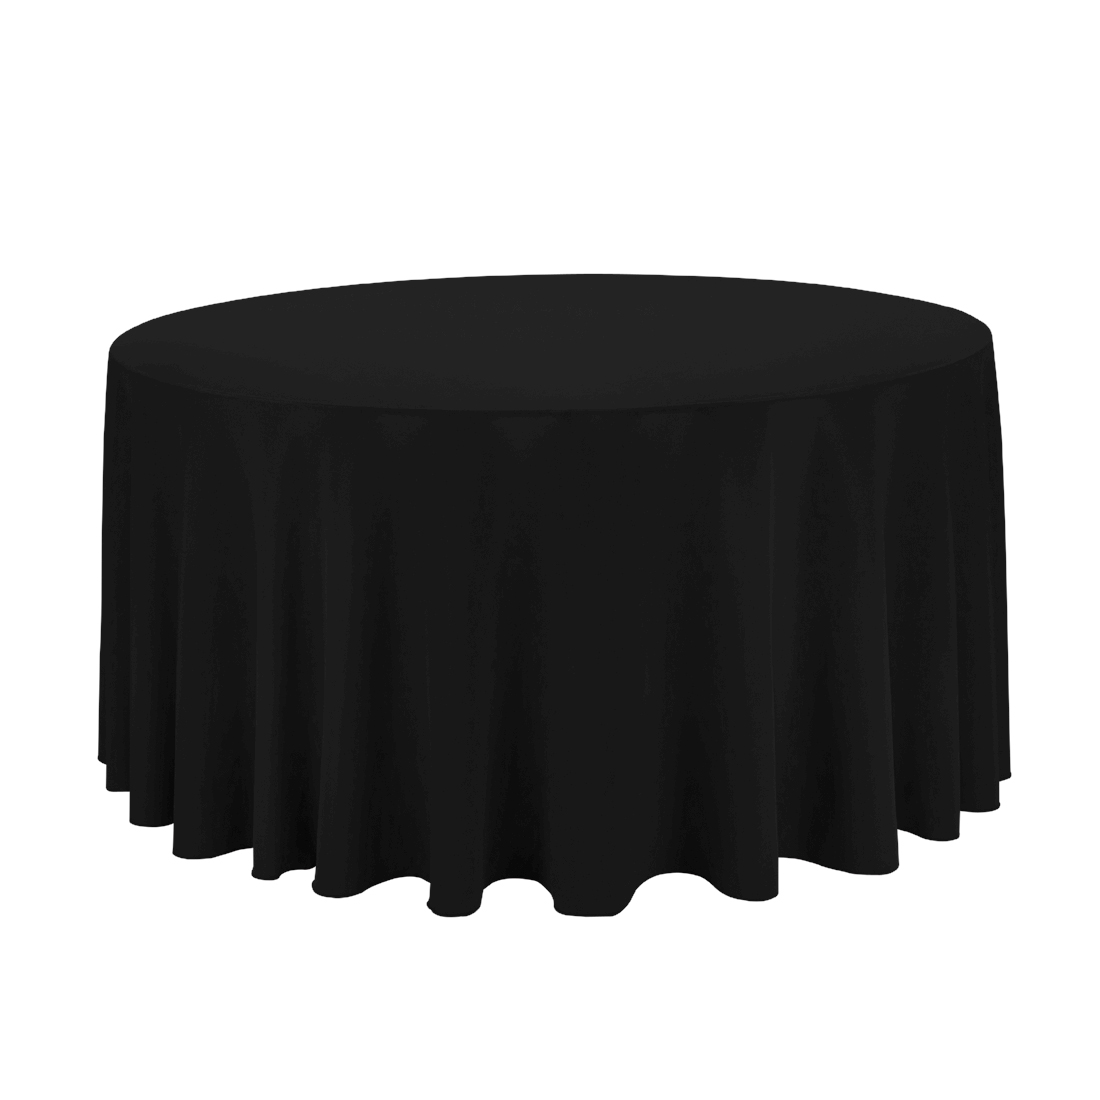 Black Table Cloth 118 Weddings Events Round Table Cloth Hire